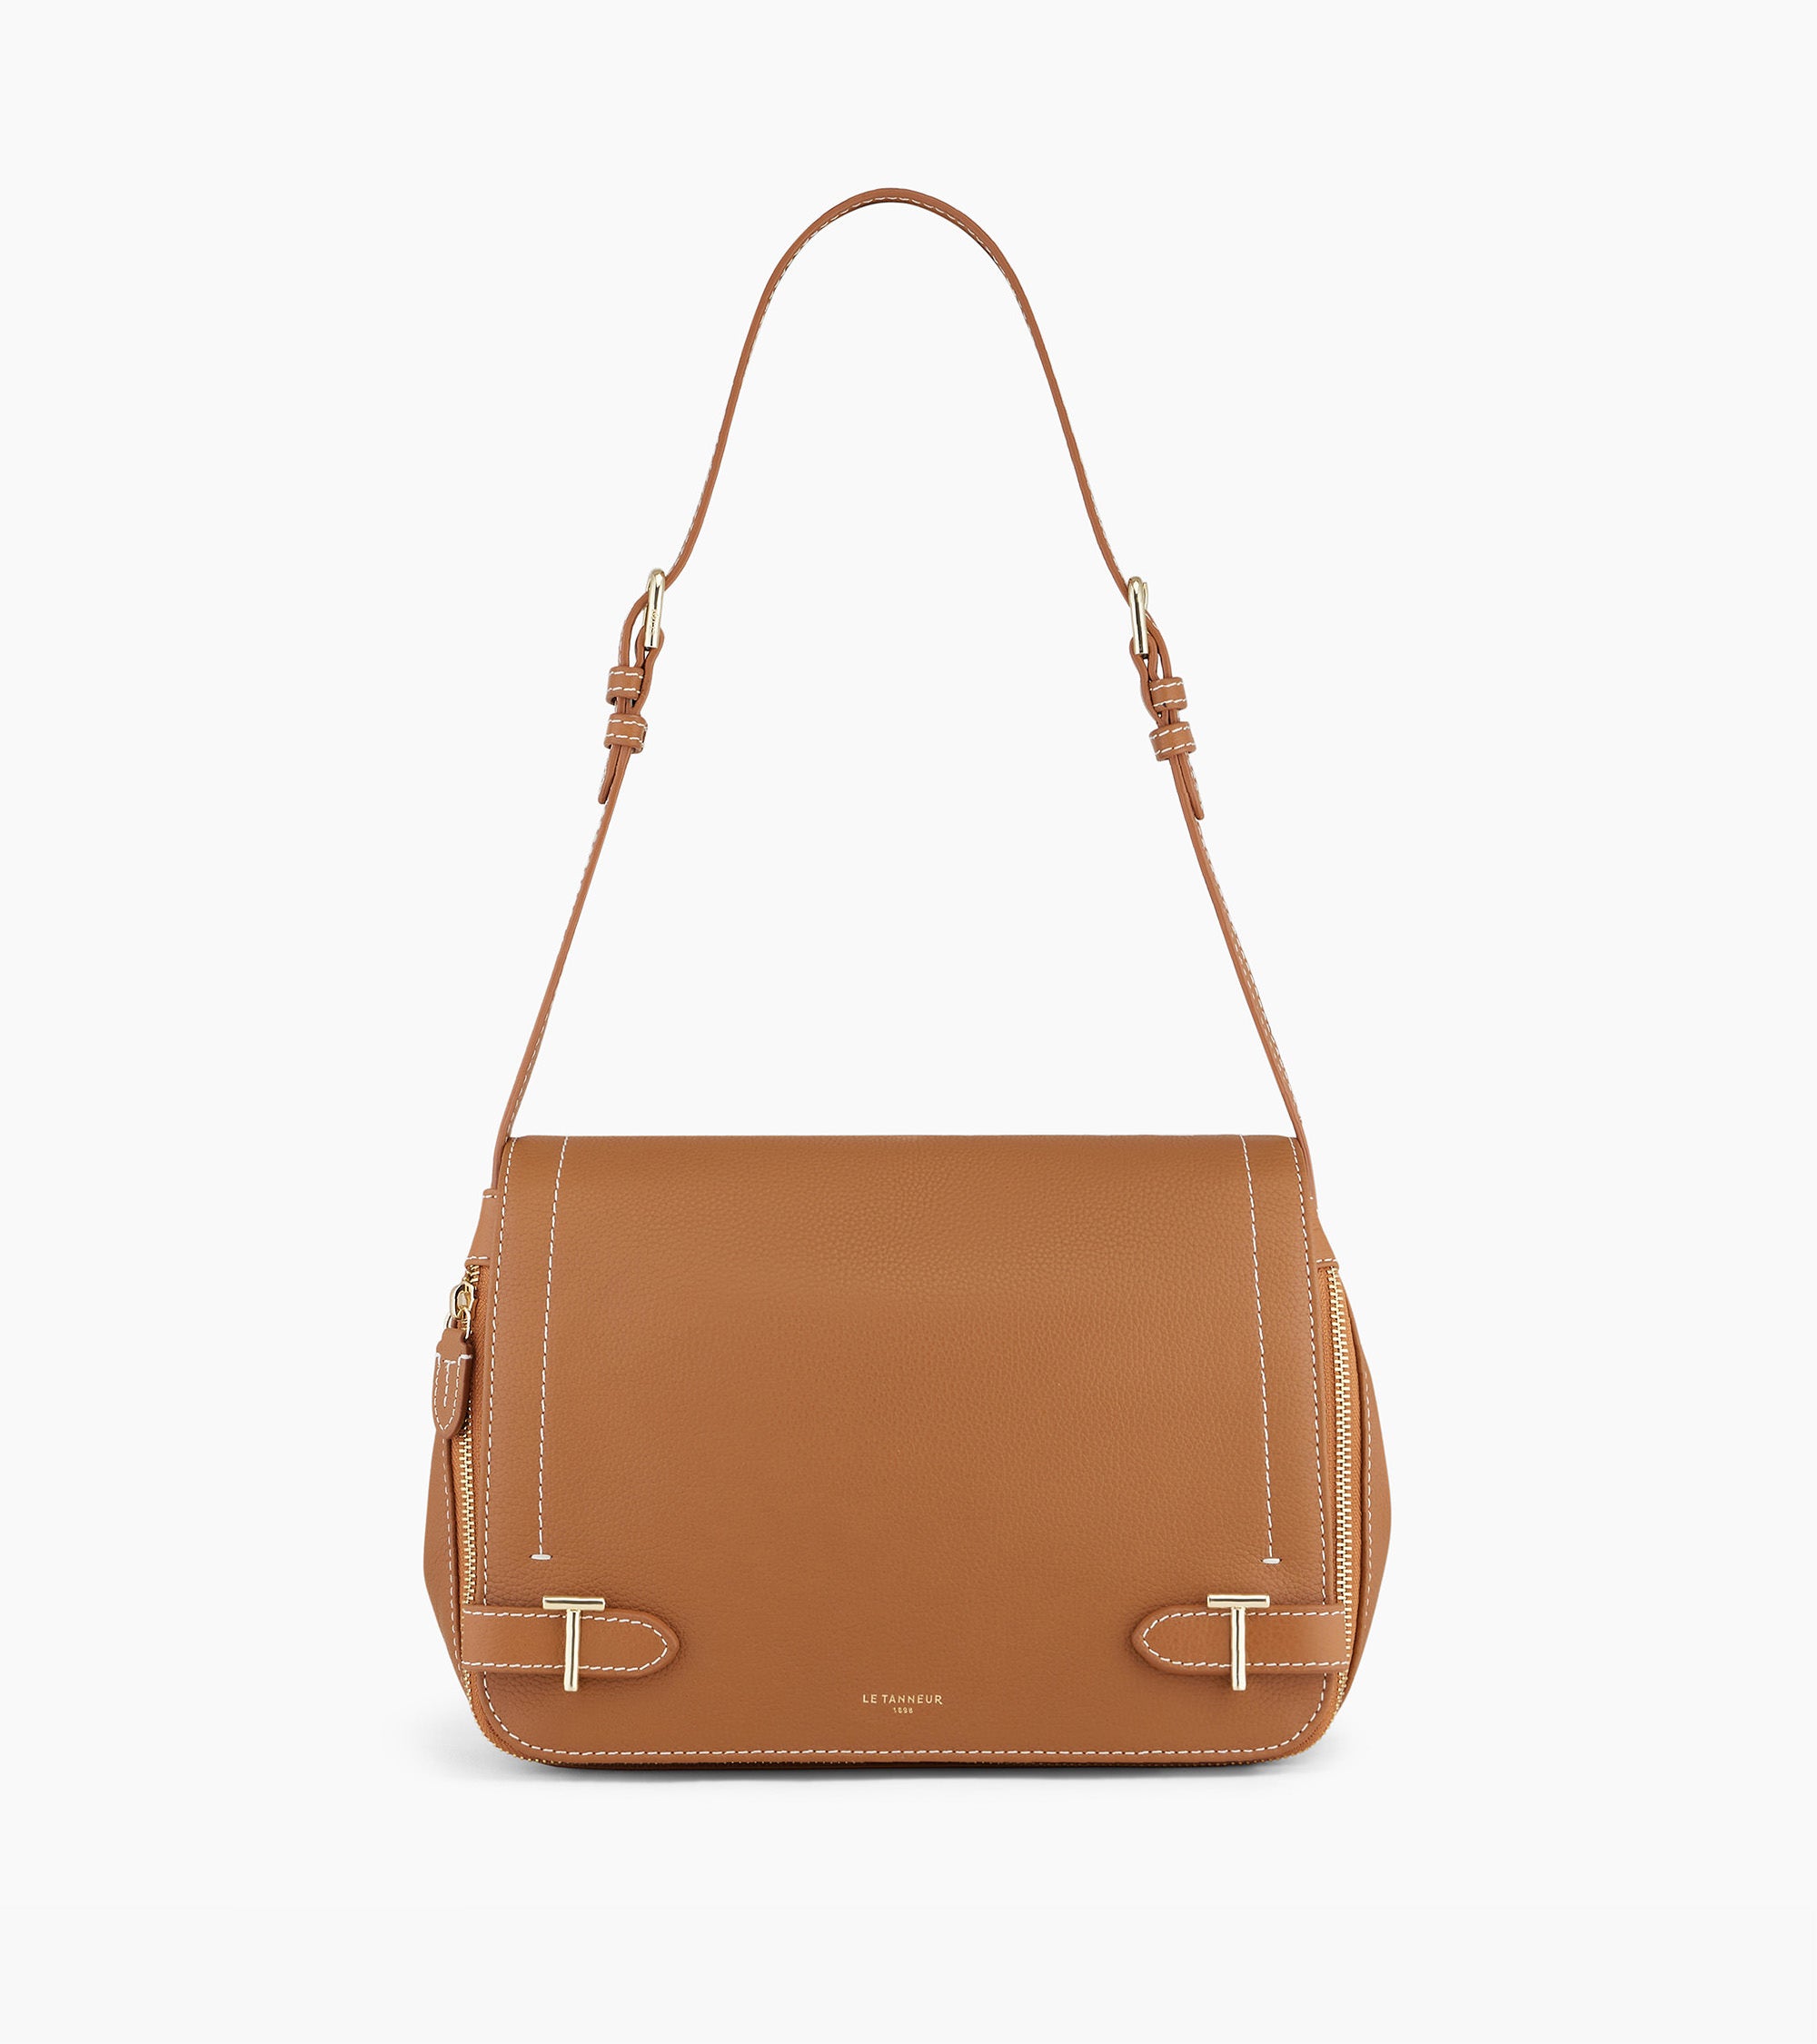 Simone medium-sized bag with crossbody strap in pebbled leather